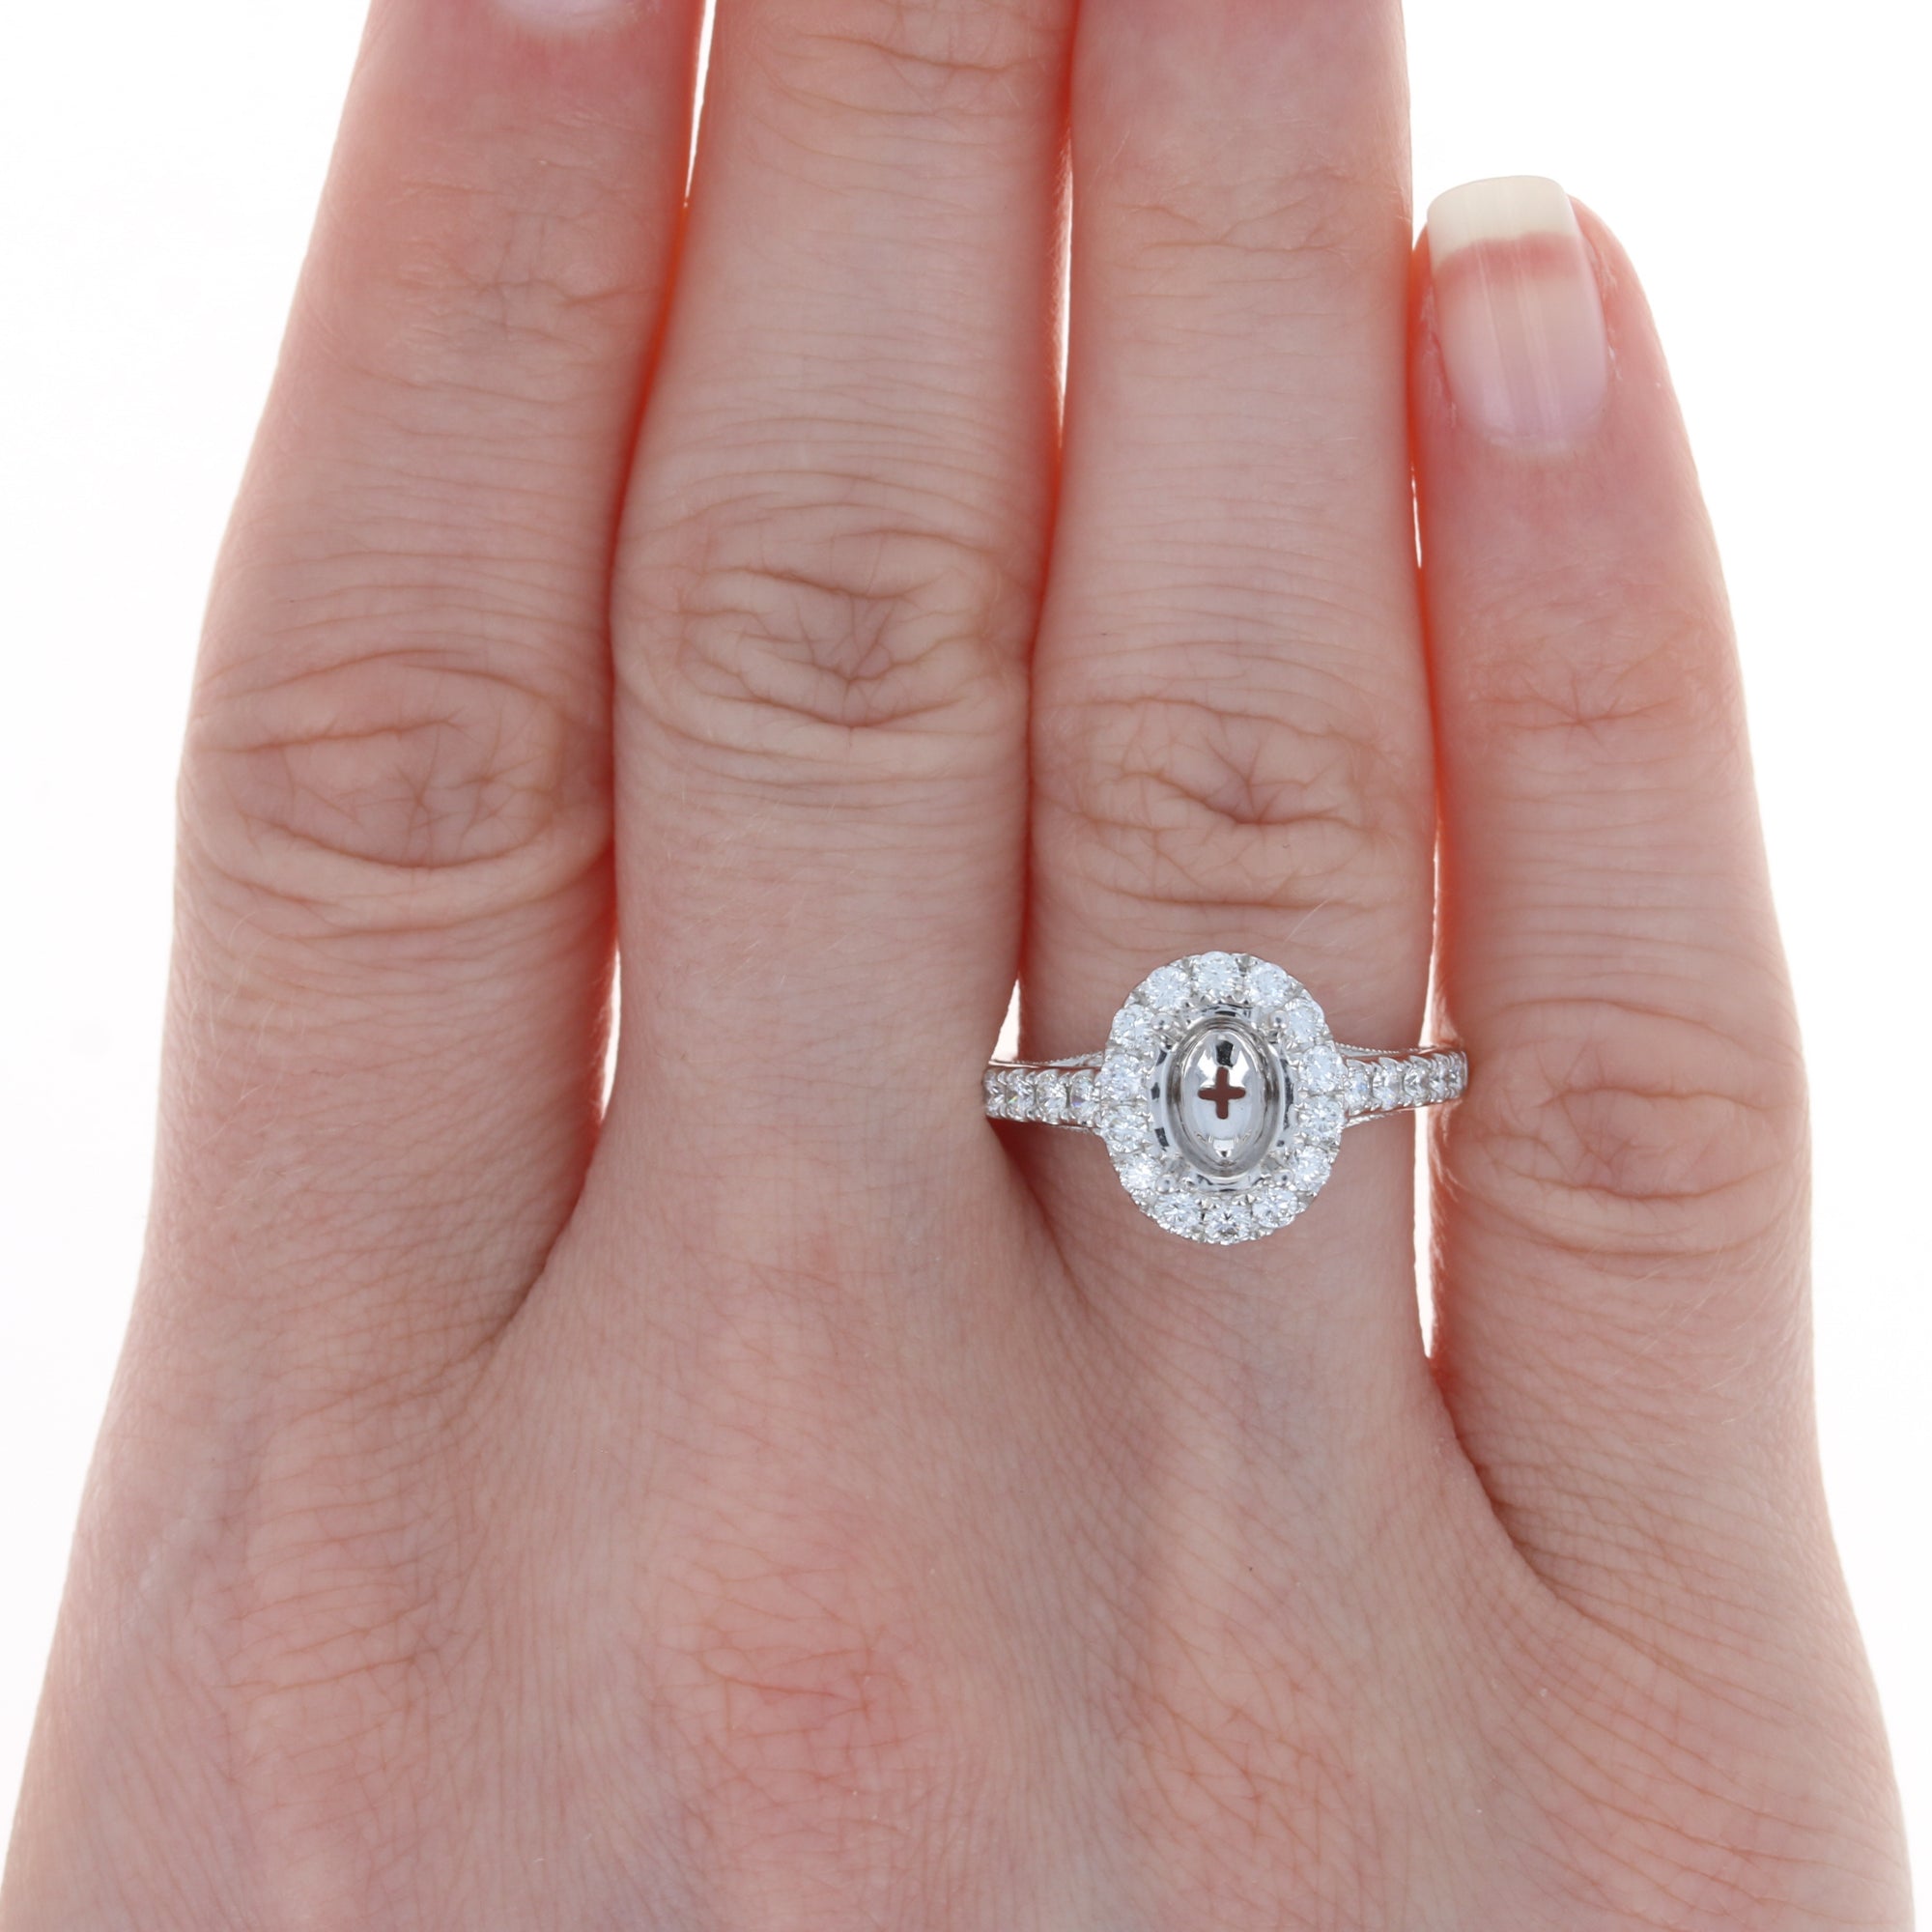 10K White Gold Oval Halo Engagement Ring 50916-E-10X8-10KW | J. West  Jewelers | Round Rock, TX